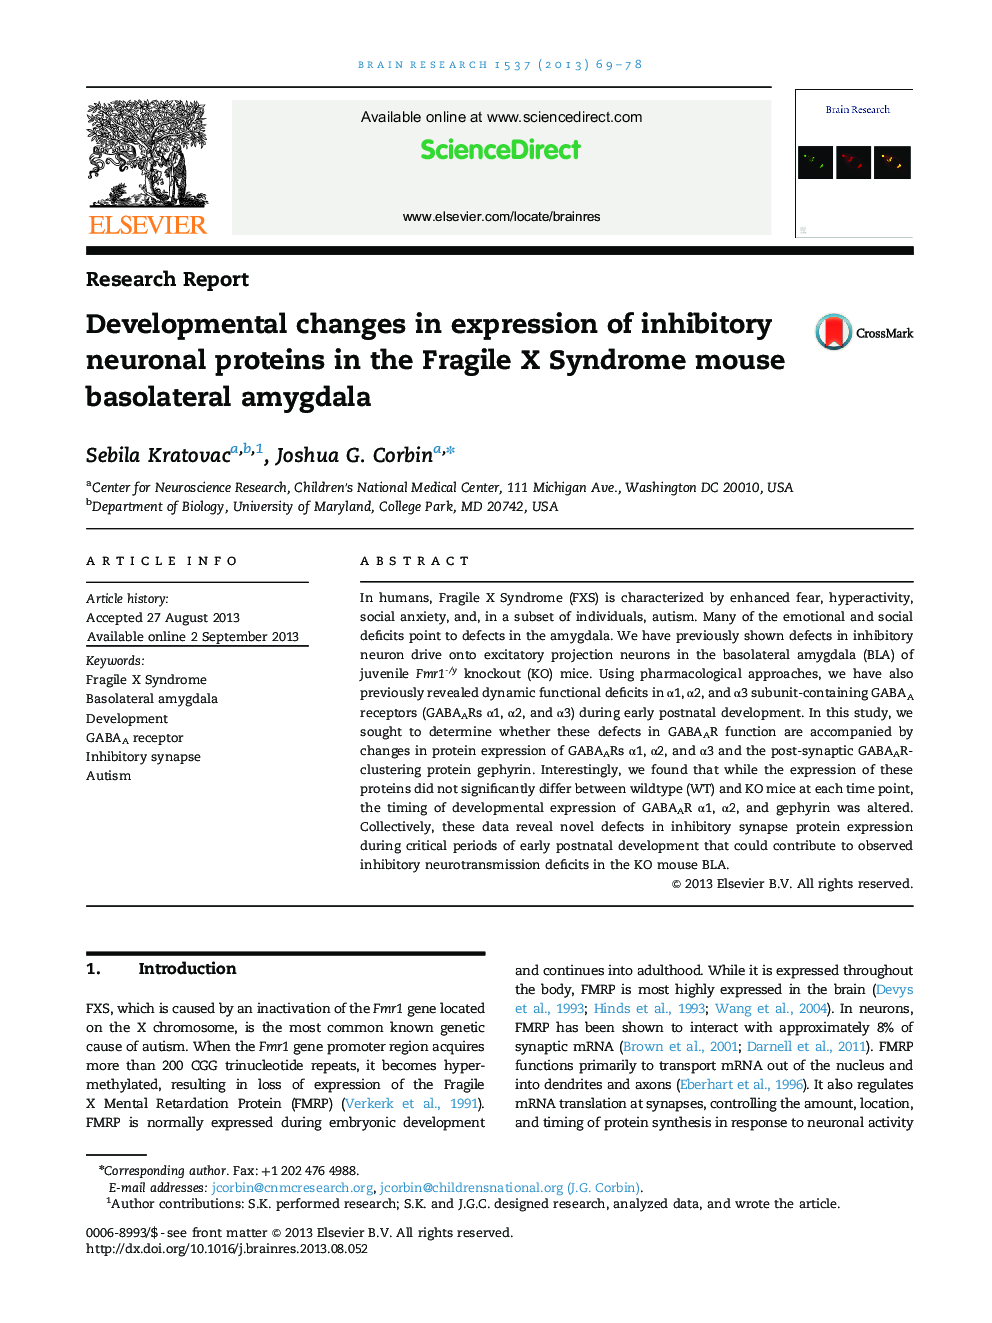 Research ReportDevelopmental changes in expression of inhibitory neuronal proteins in the Fragile X Syndrome mouse basolateral amygdala